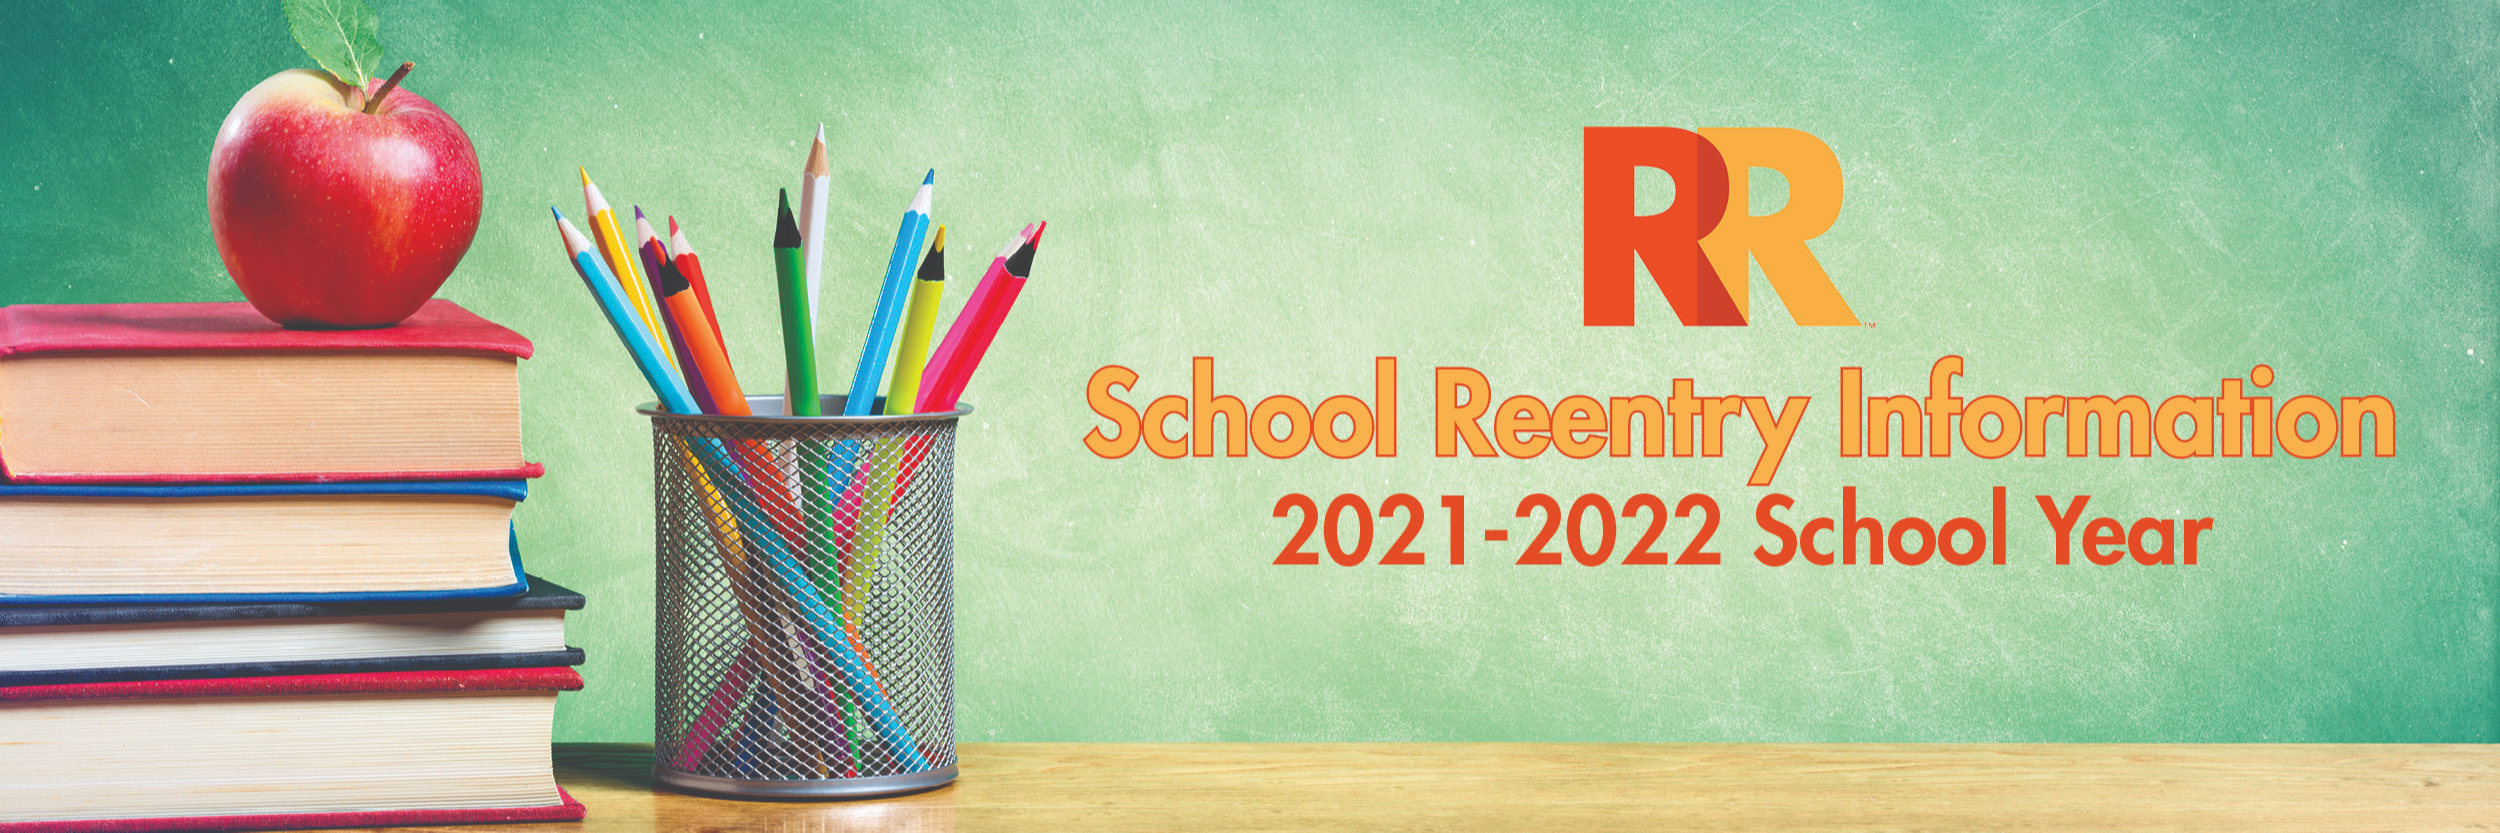 School Reentry Information for the 21-22 School Year